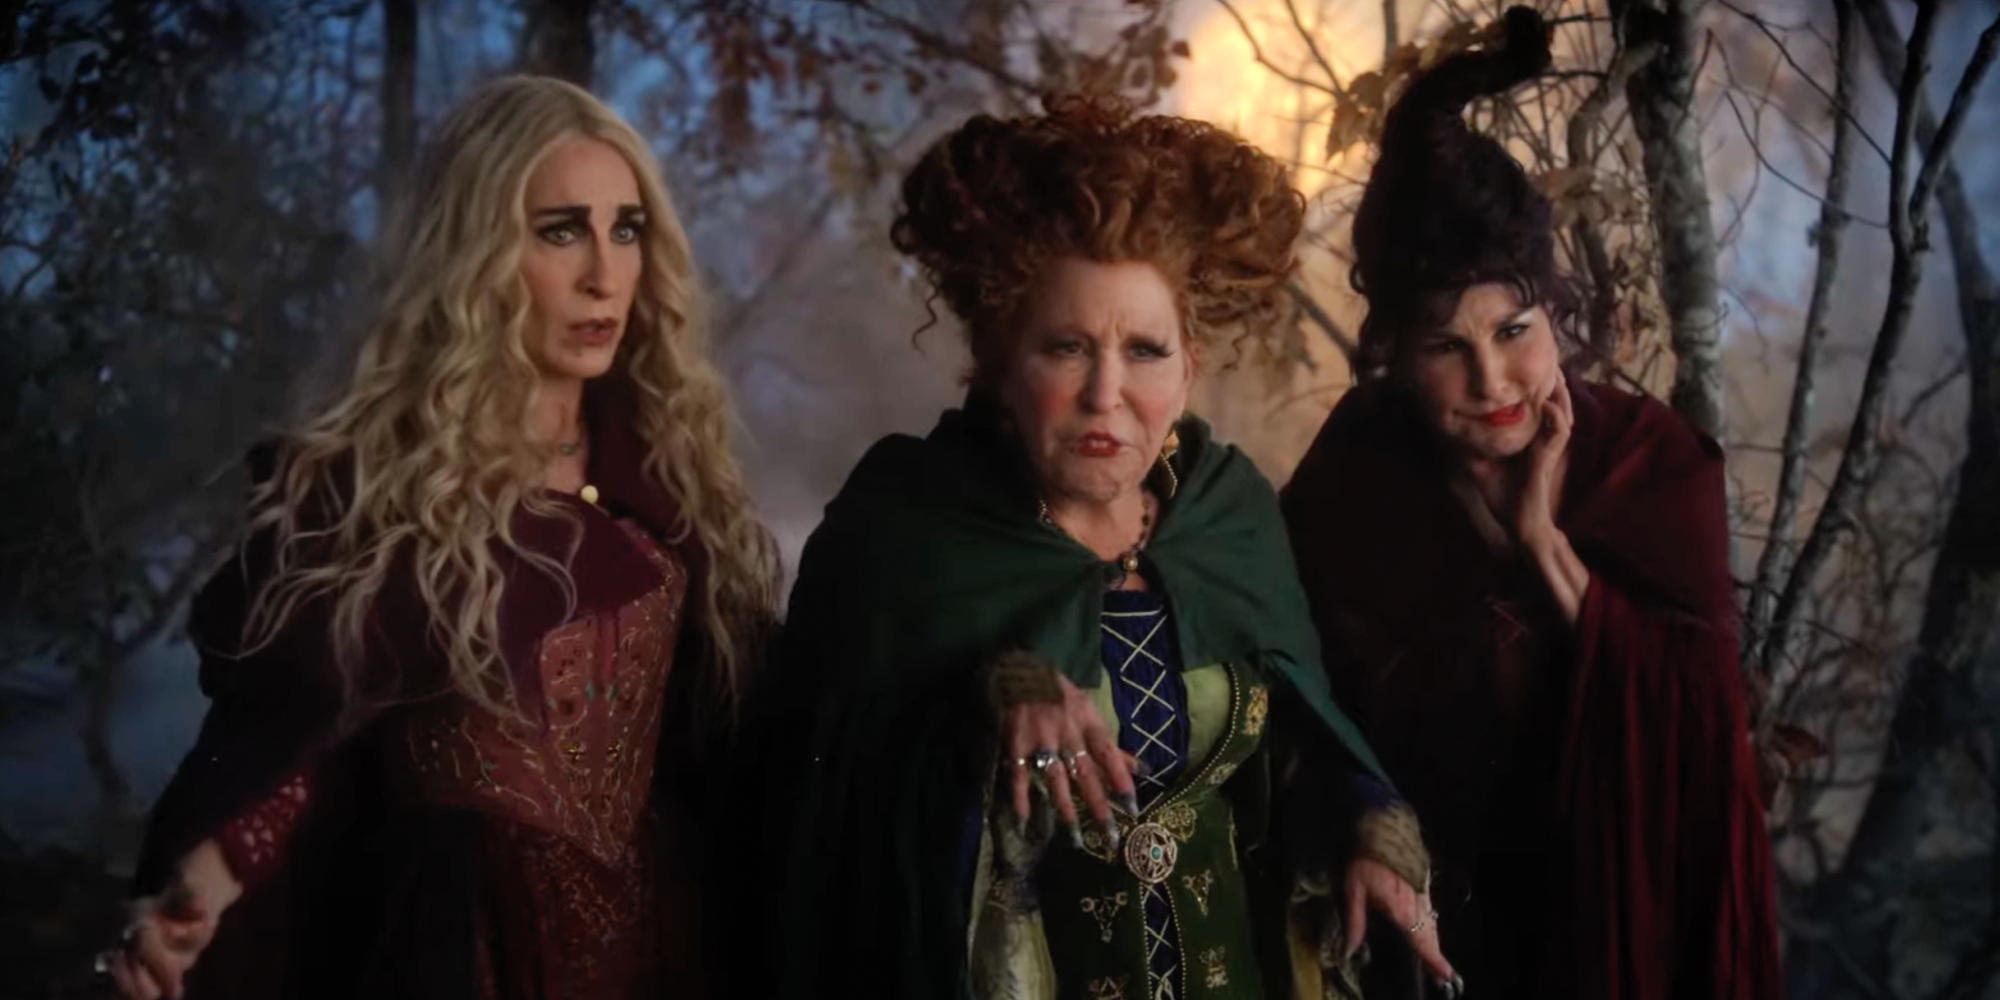 The Sanderson sisters in the woods in Hocus Pocus 2